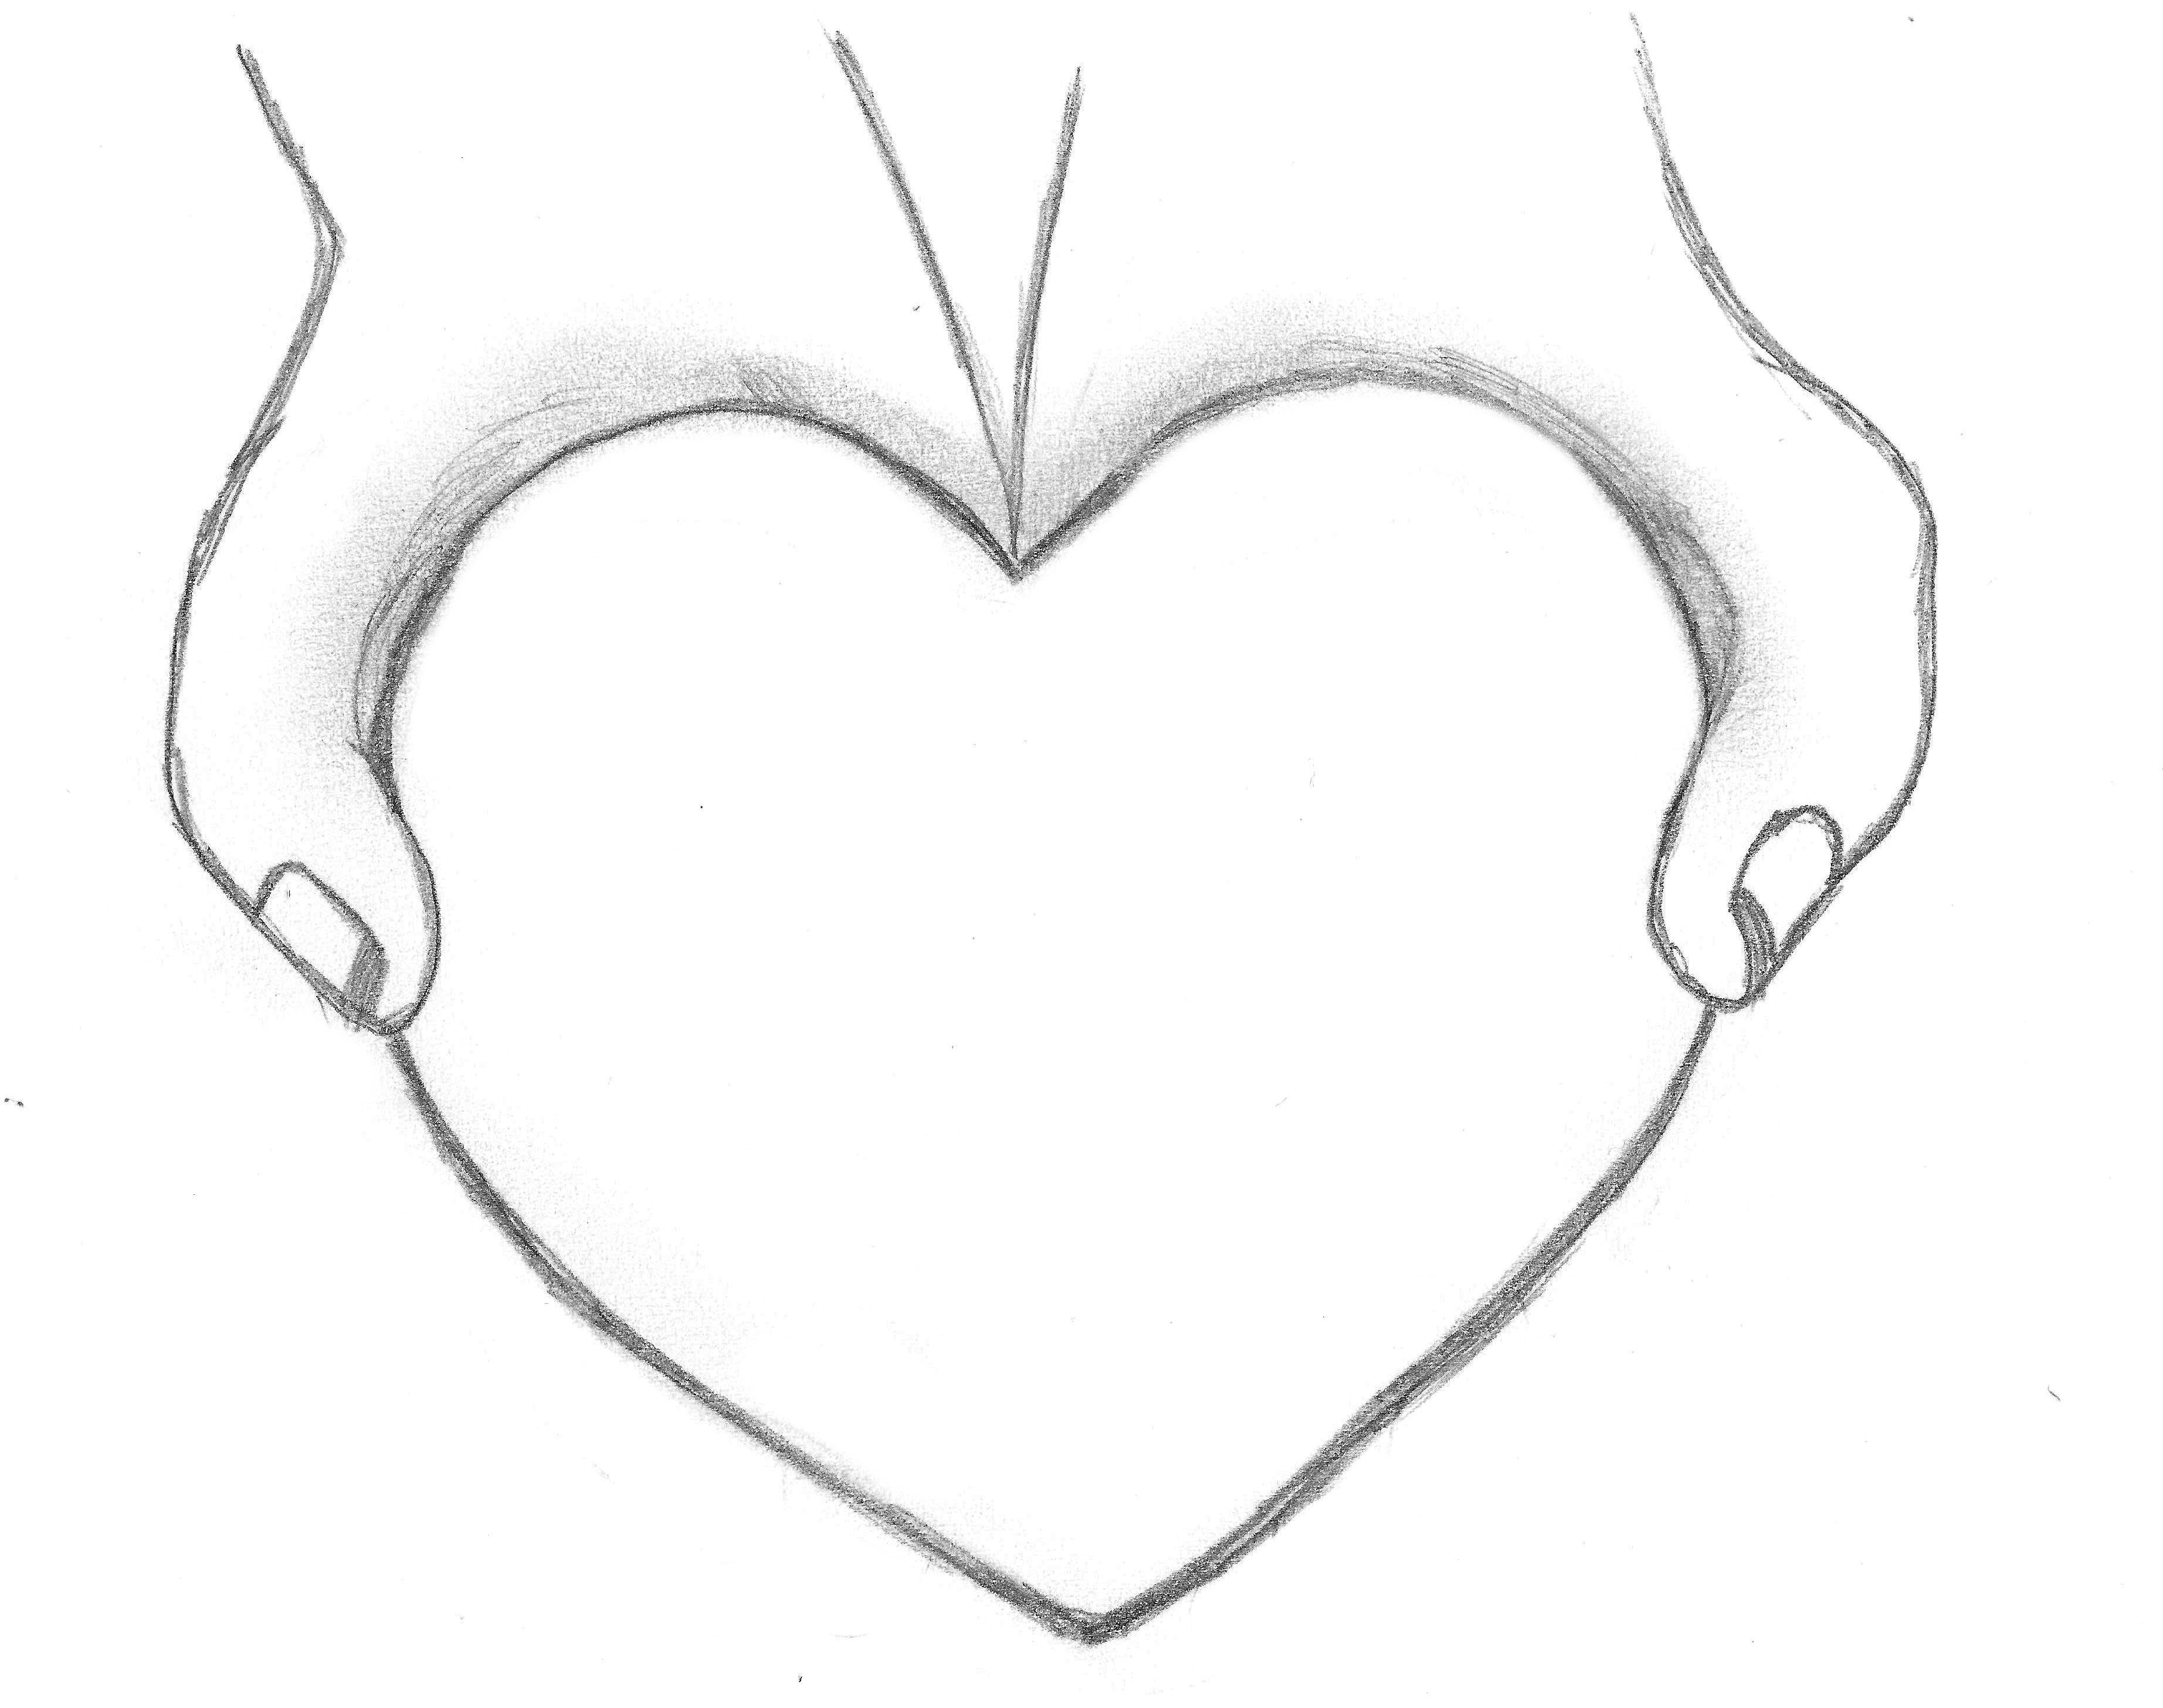 Animal How To Draw A Heart In Sketch for Kindergarten